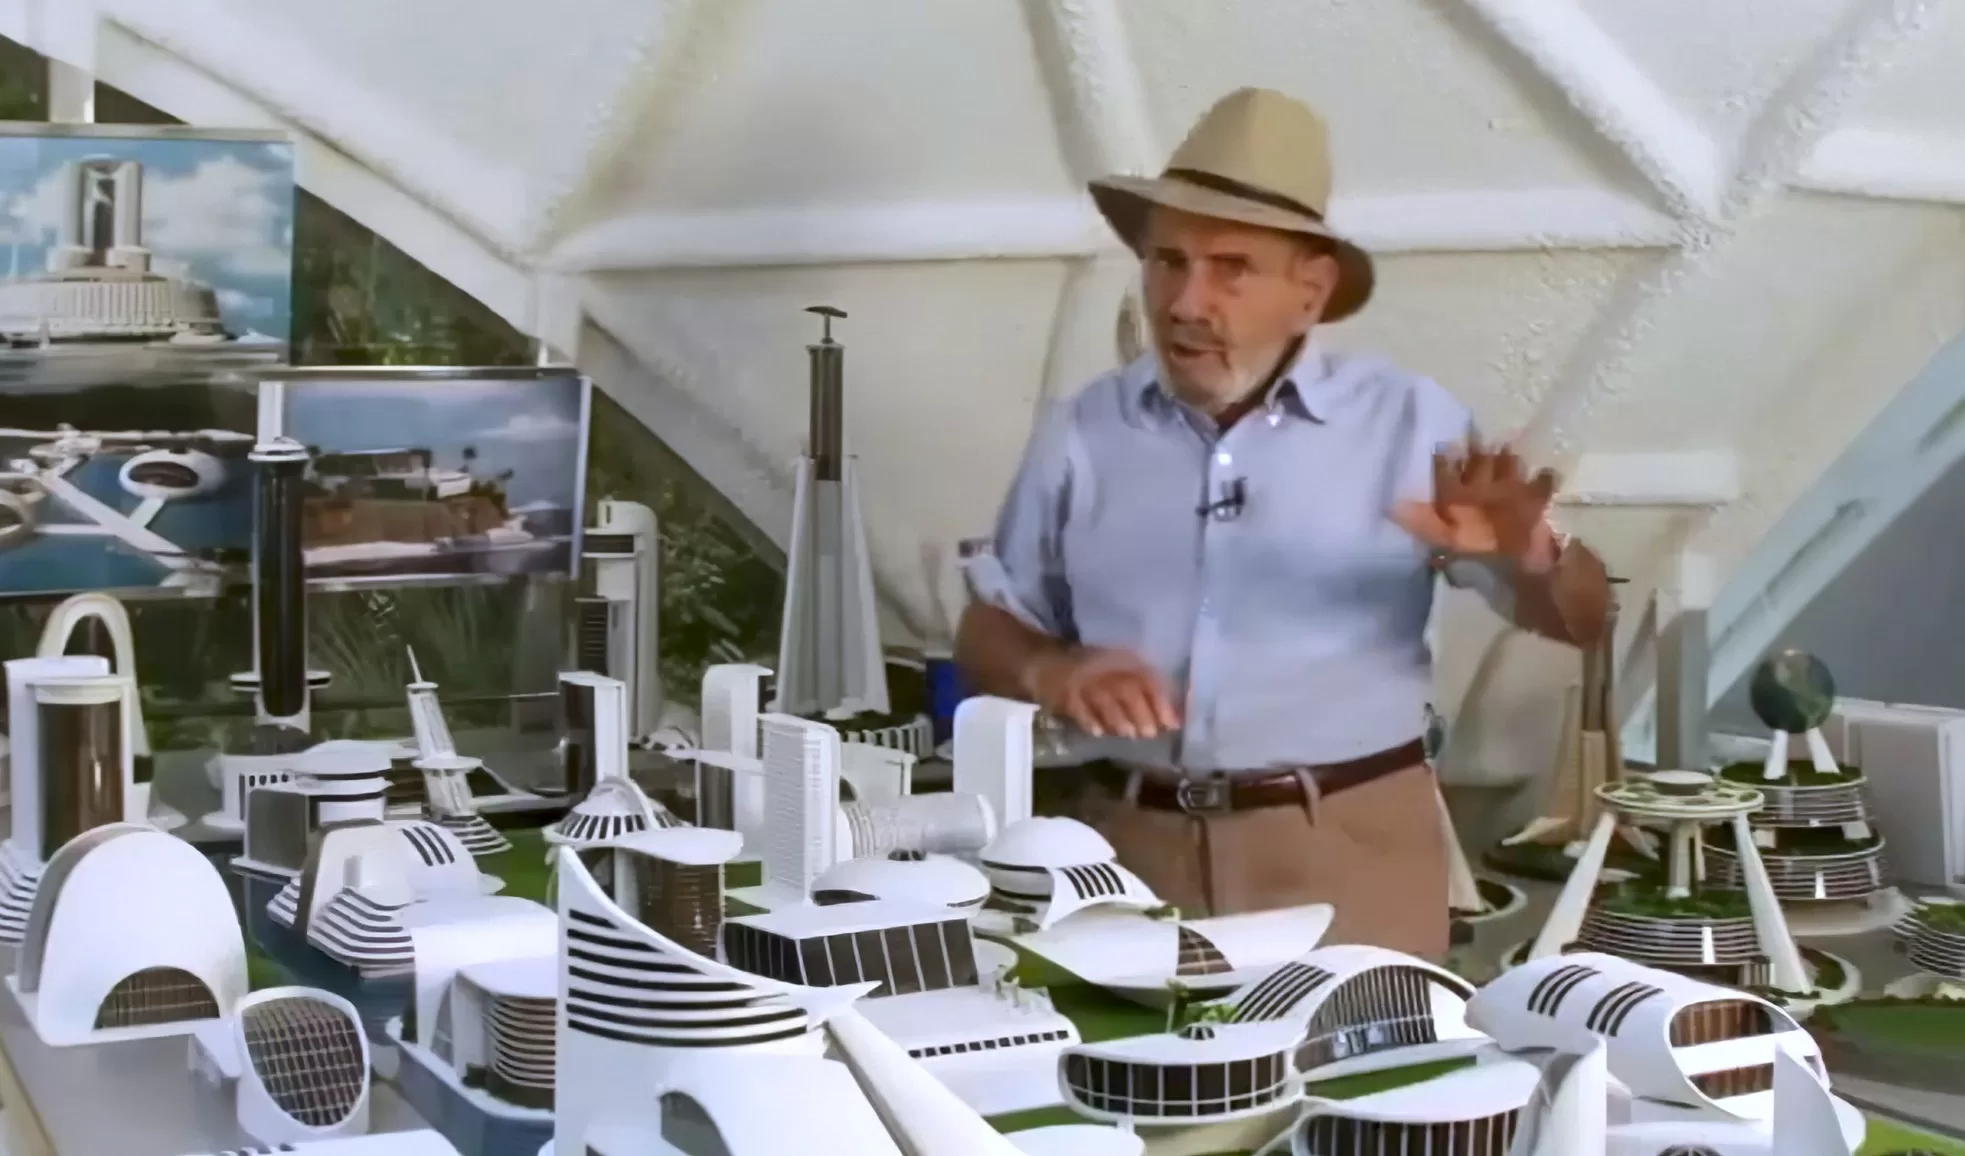 About the name 'Jacque Fresco Movement'